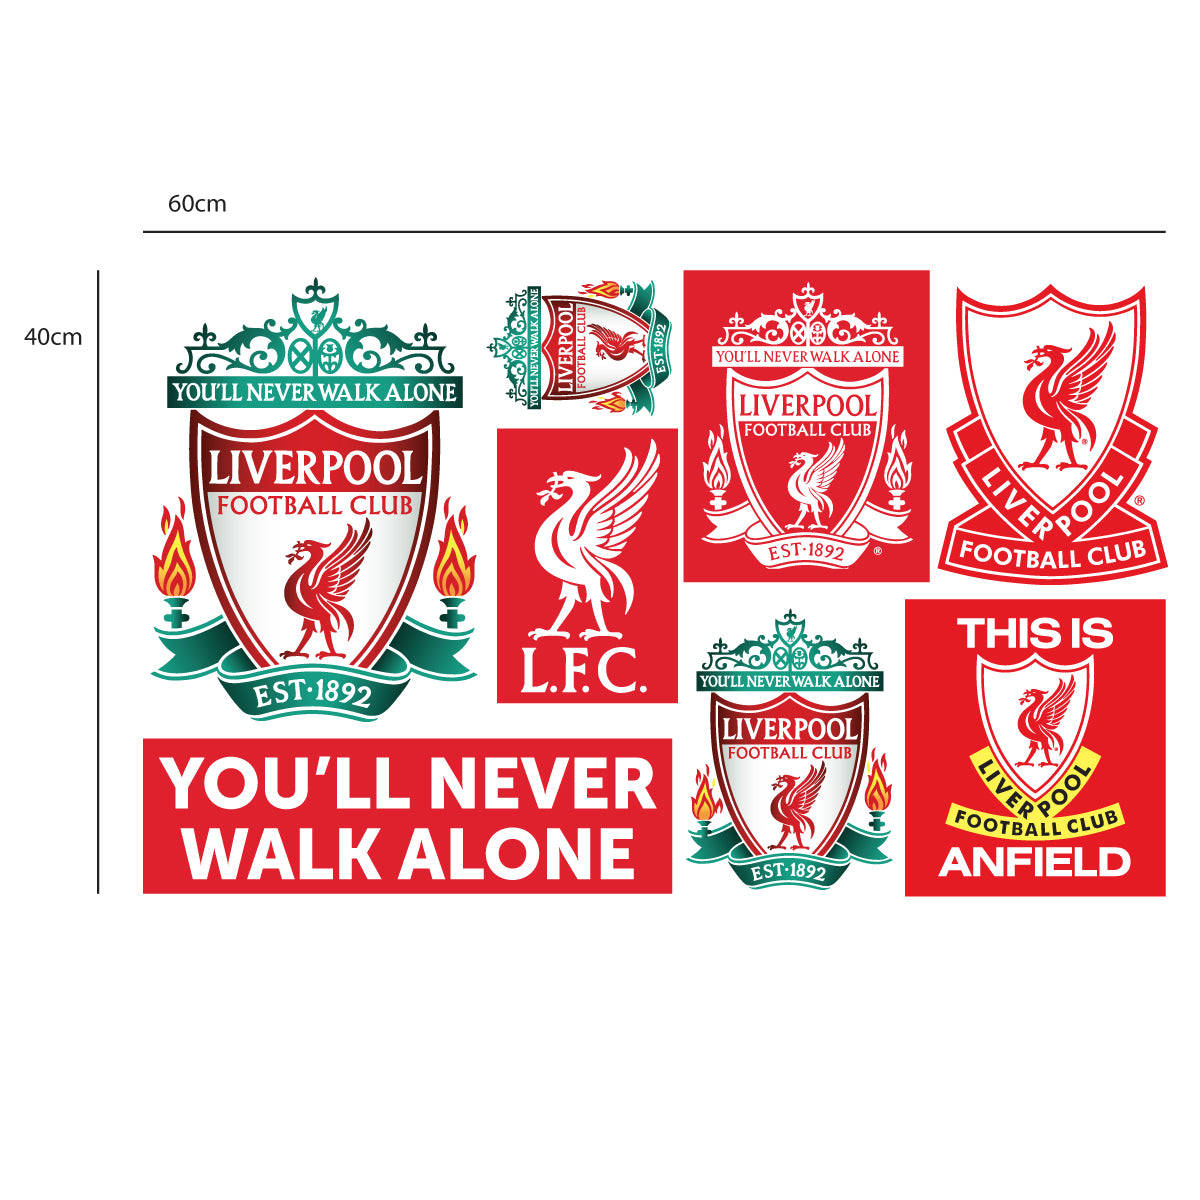 Liverpool Football Club - 'This Is Anfield' Wall Decal + LFC Wall Sticker Set